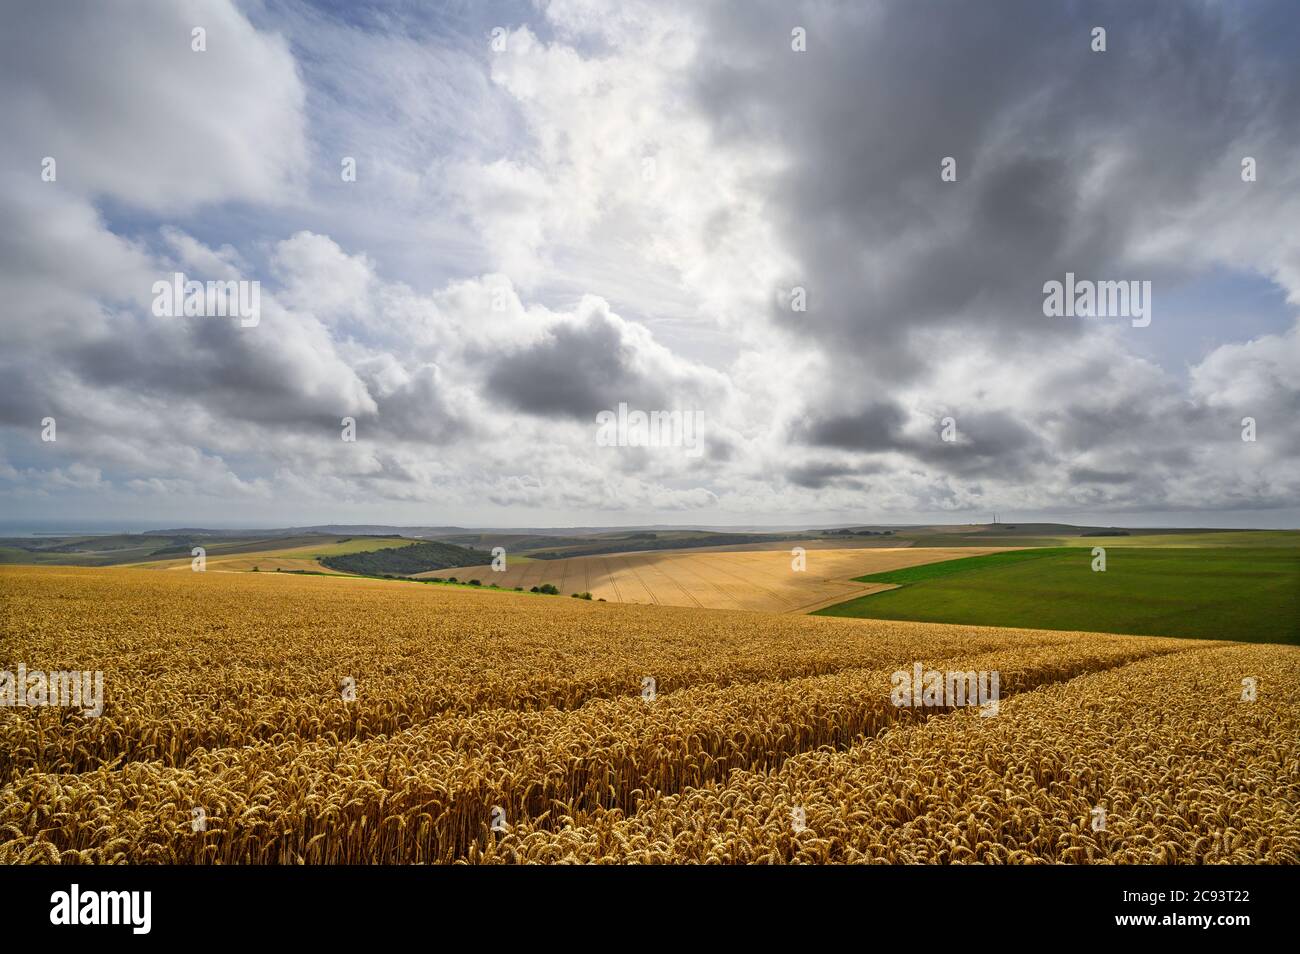 South Downs National Park, Sussex, England, UK. Wheat field near Firle Beacon and Newhaven with views to the south coast and English Channel. Stock Photo